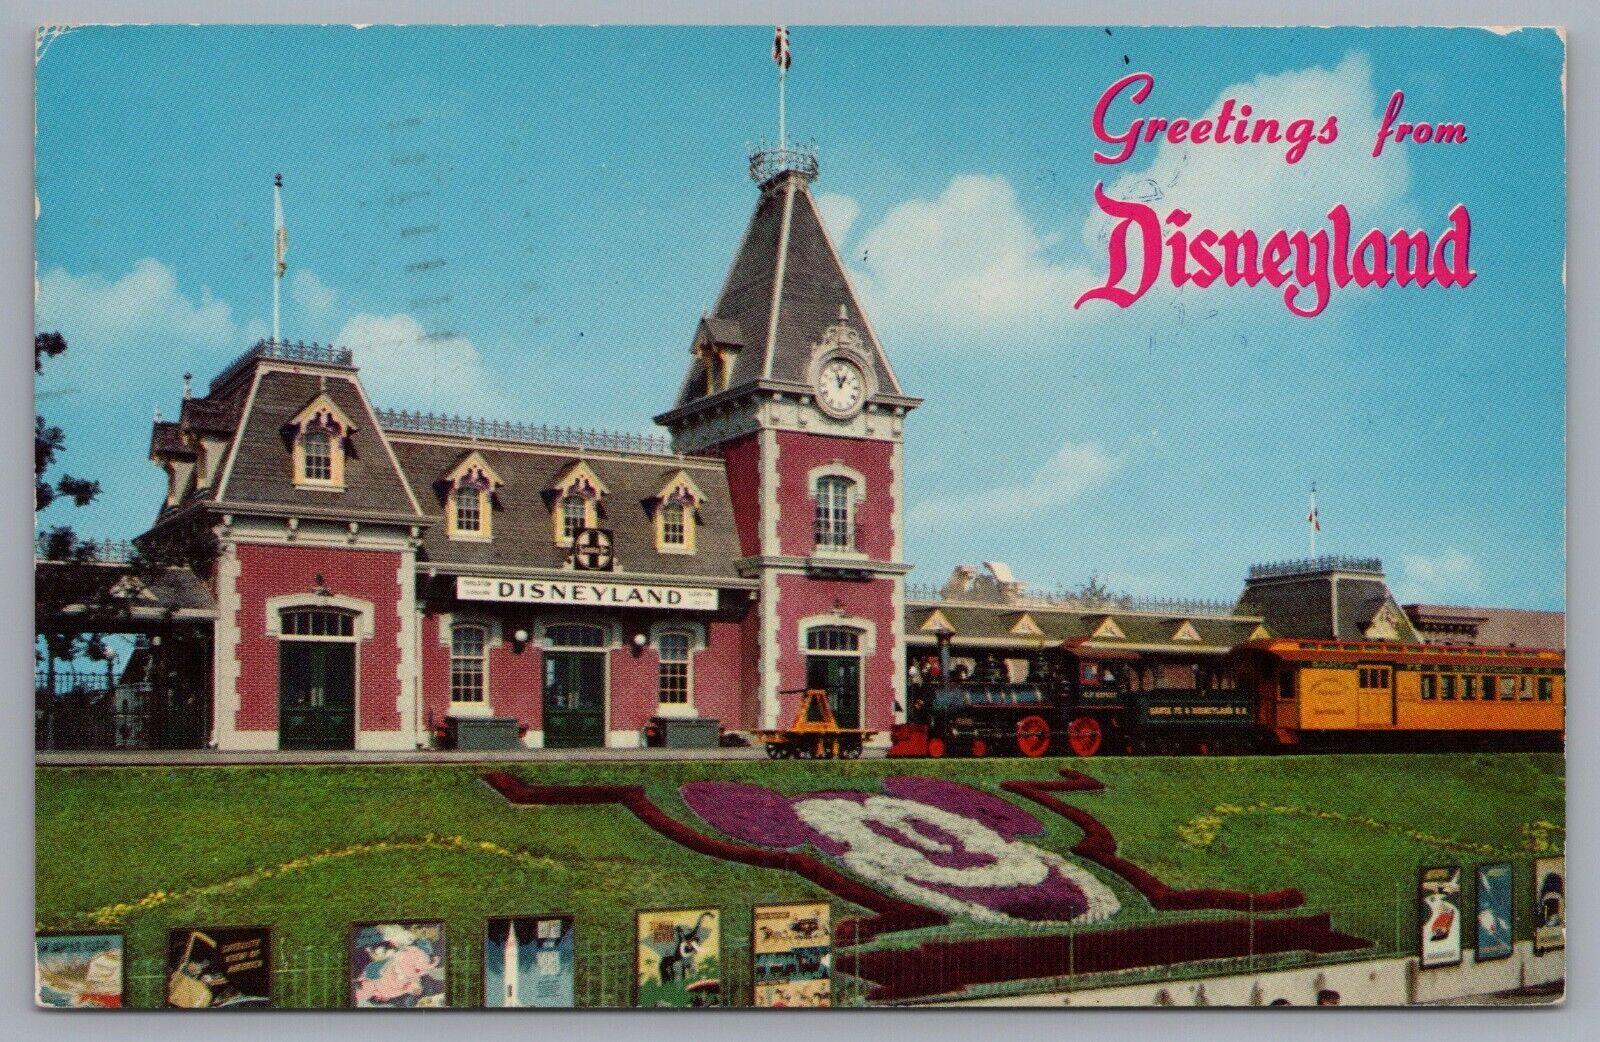 Greetings From Disneyland Entrance And Main Street Station Train Depot Postcard